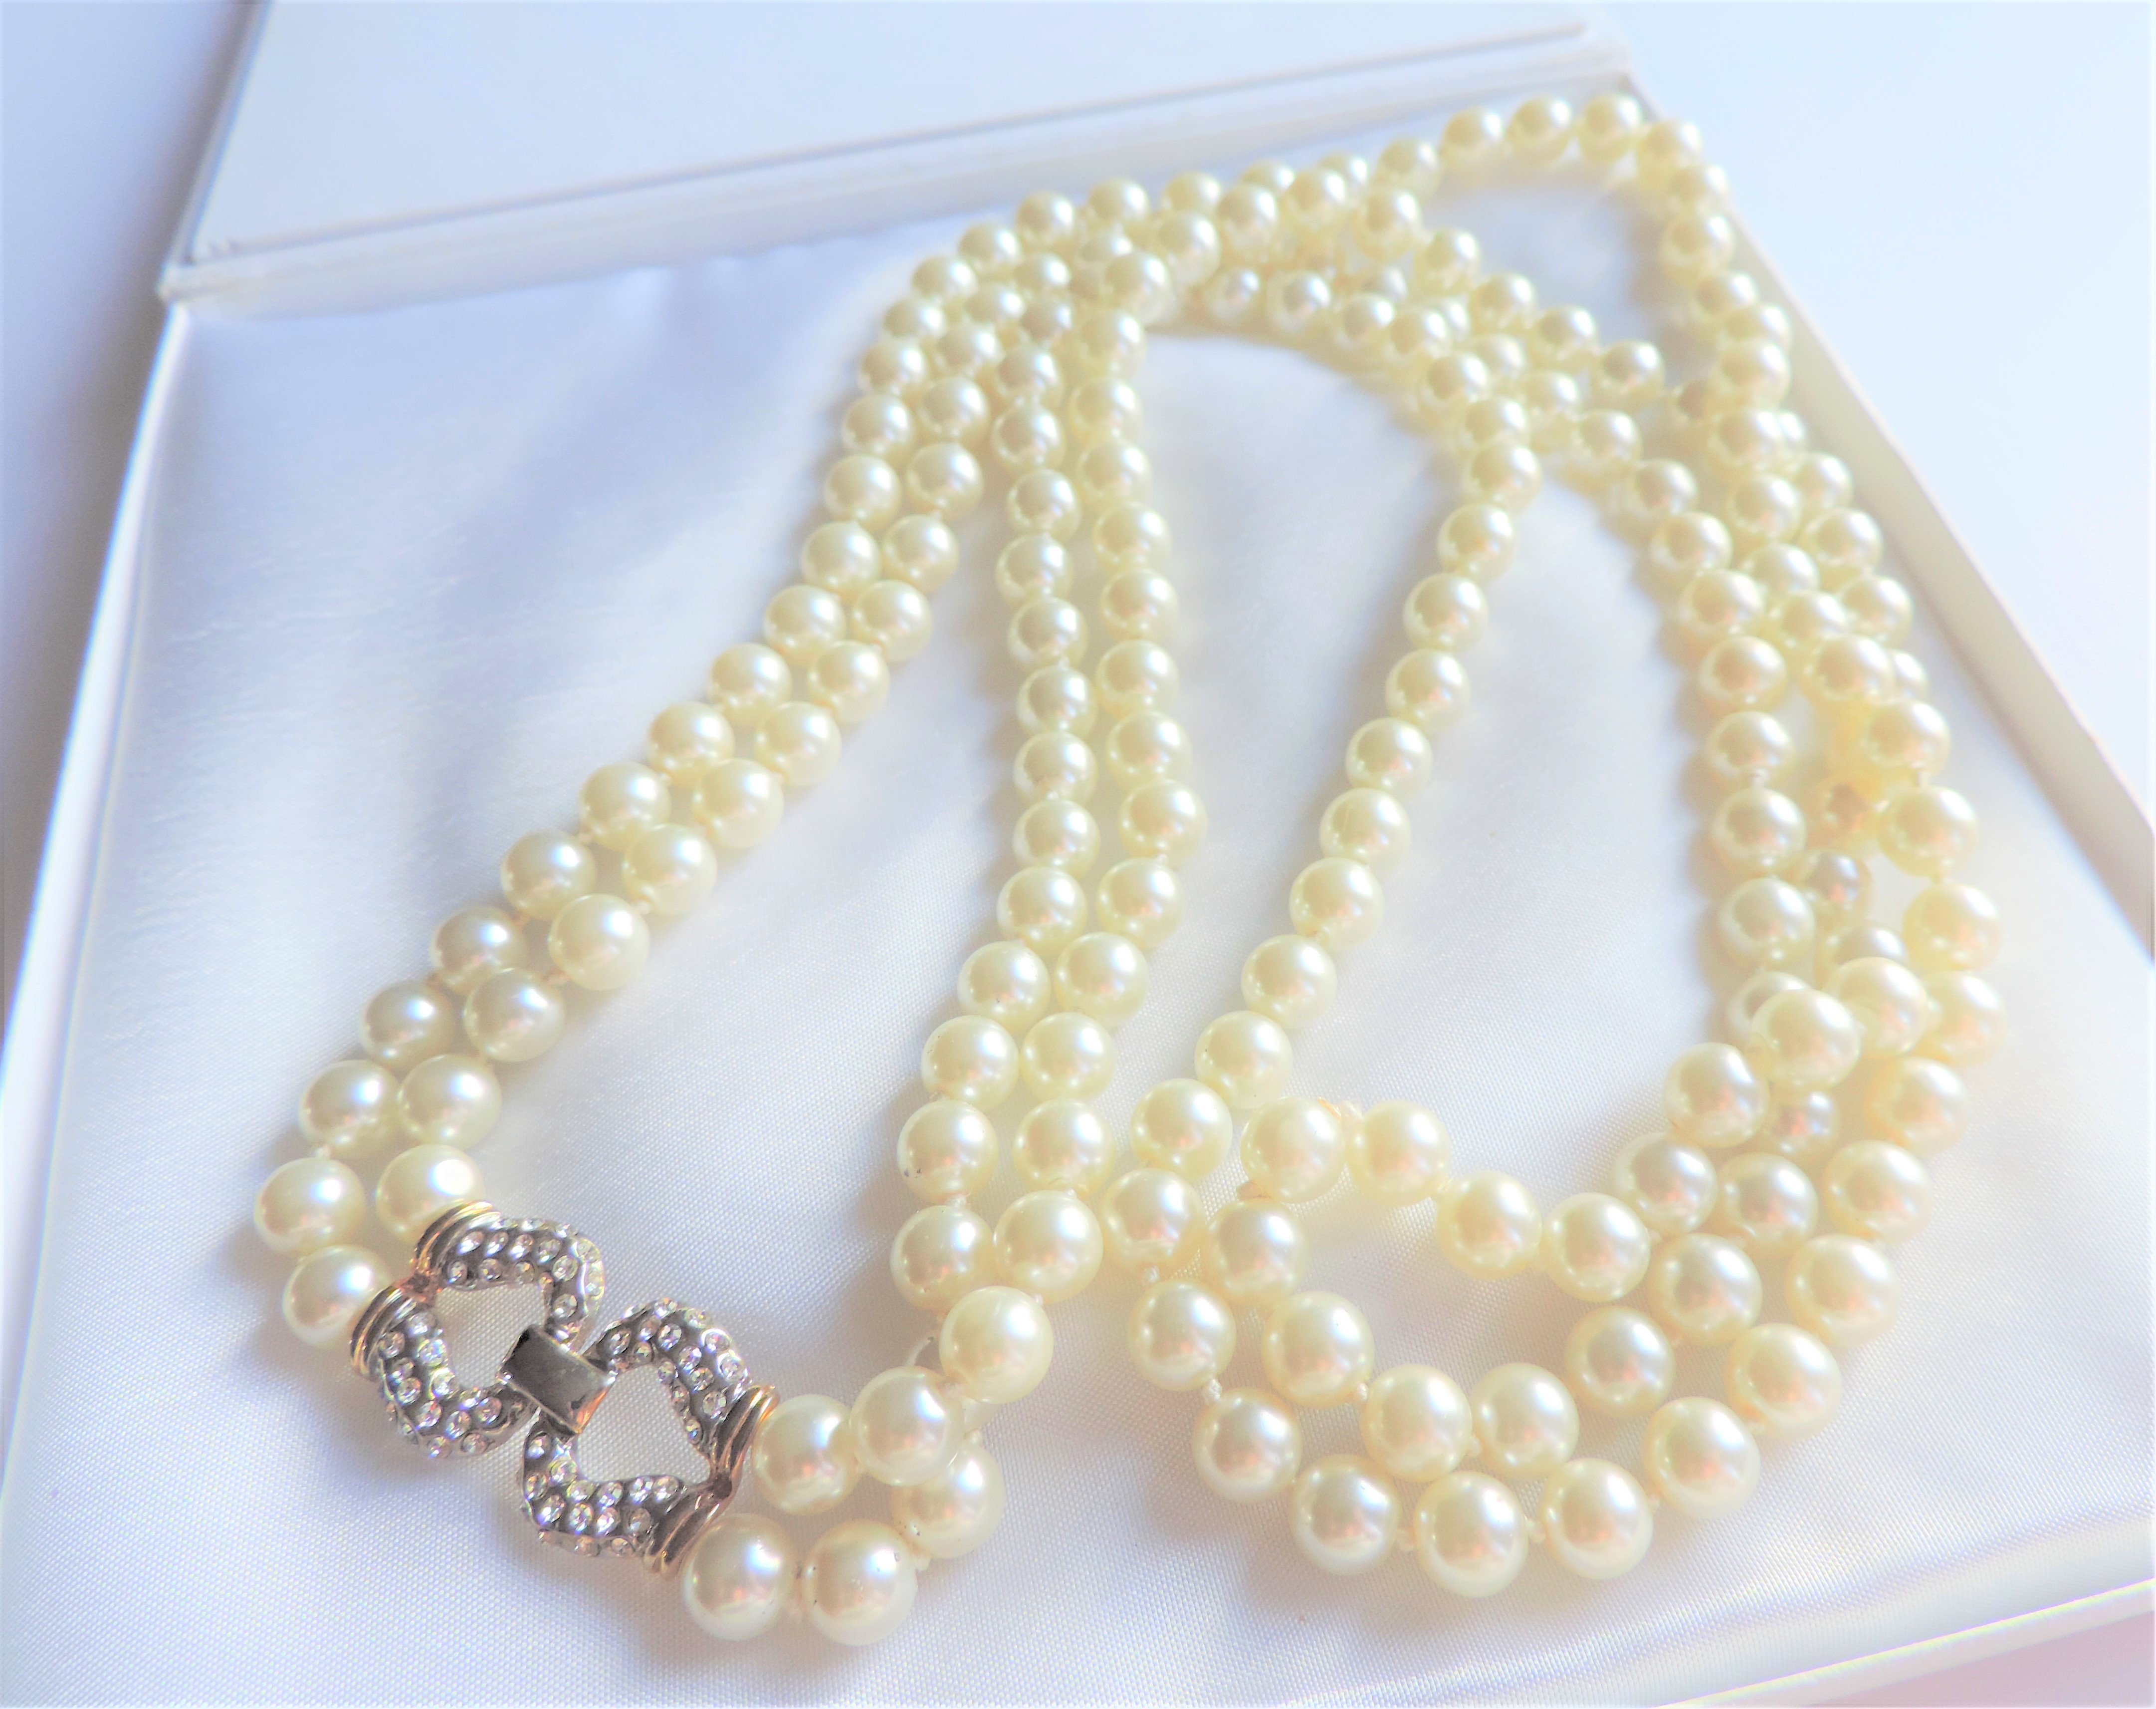 Double Strand Pearl Necklace Pearls 26"""" Long New with Gift Box - Image 4 of 4